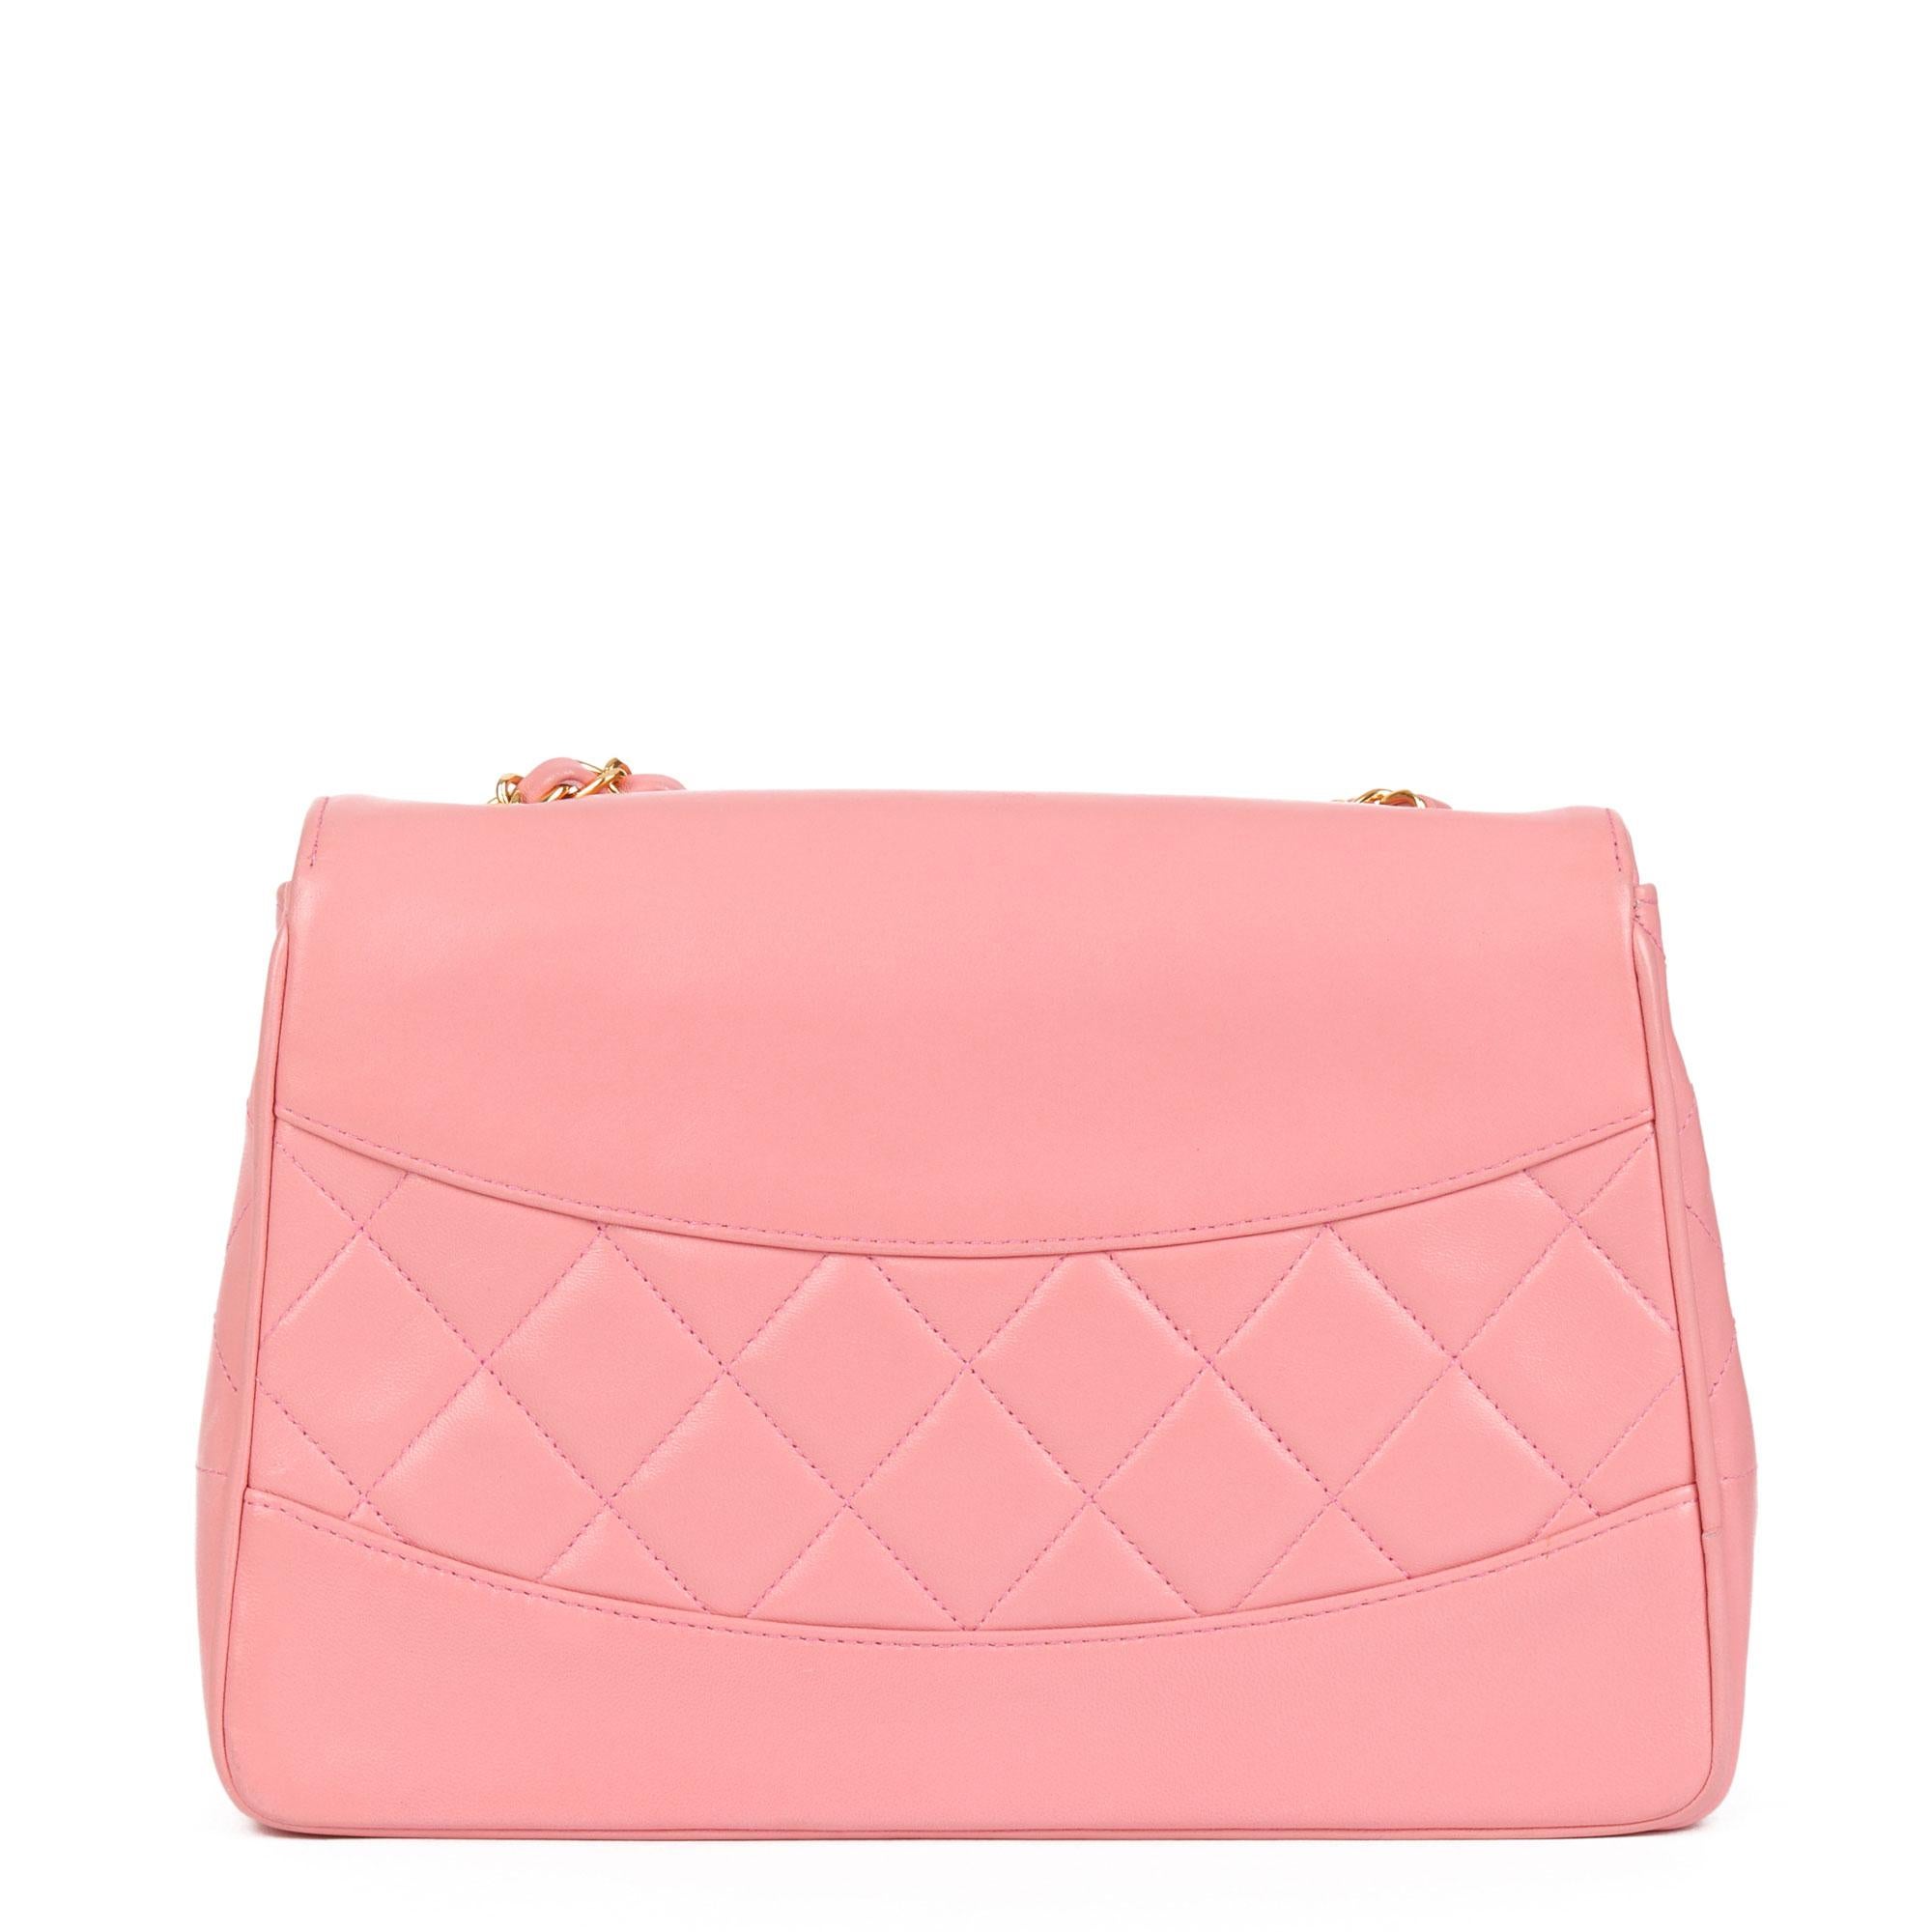 Chanel Pink Quilted Lambskin Vintage Medium Classic Single Flap Bag 5